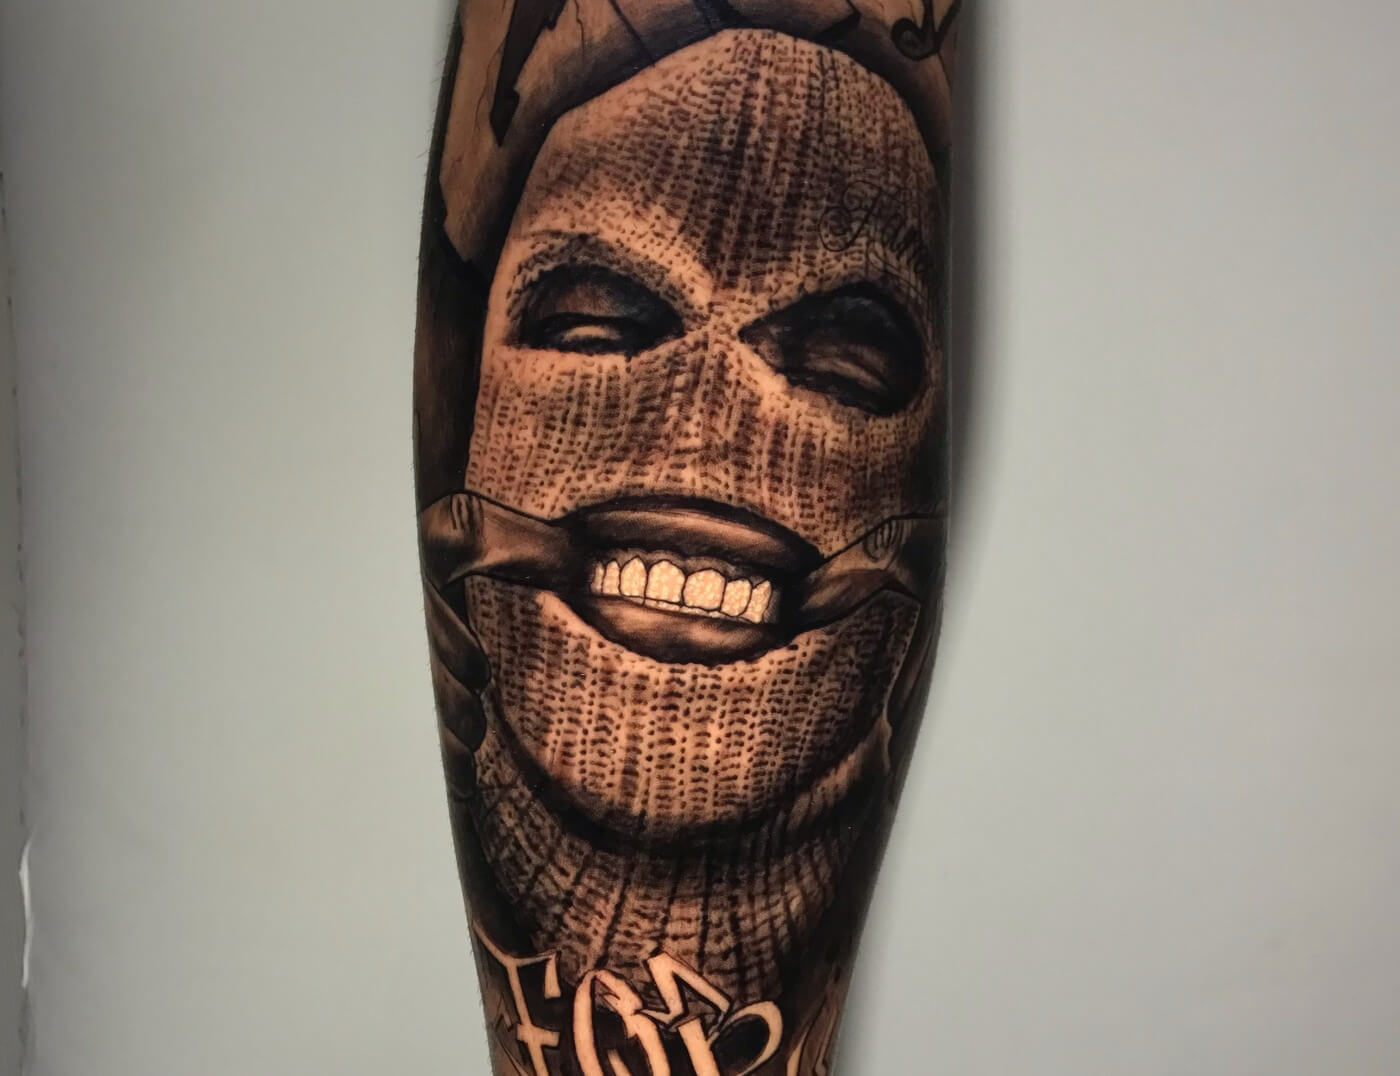 Ski Mask Black & Grey Photo Realism Tattoo by Rene Cristobal, a guest artist at Iron Palm Tattoos. Rene is a visiting artist from Vision Tattoo Studio in Concepcion, Chile. We're open late night until 2AM. Call 404-973-7828 or stop by for a free consultation.